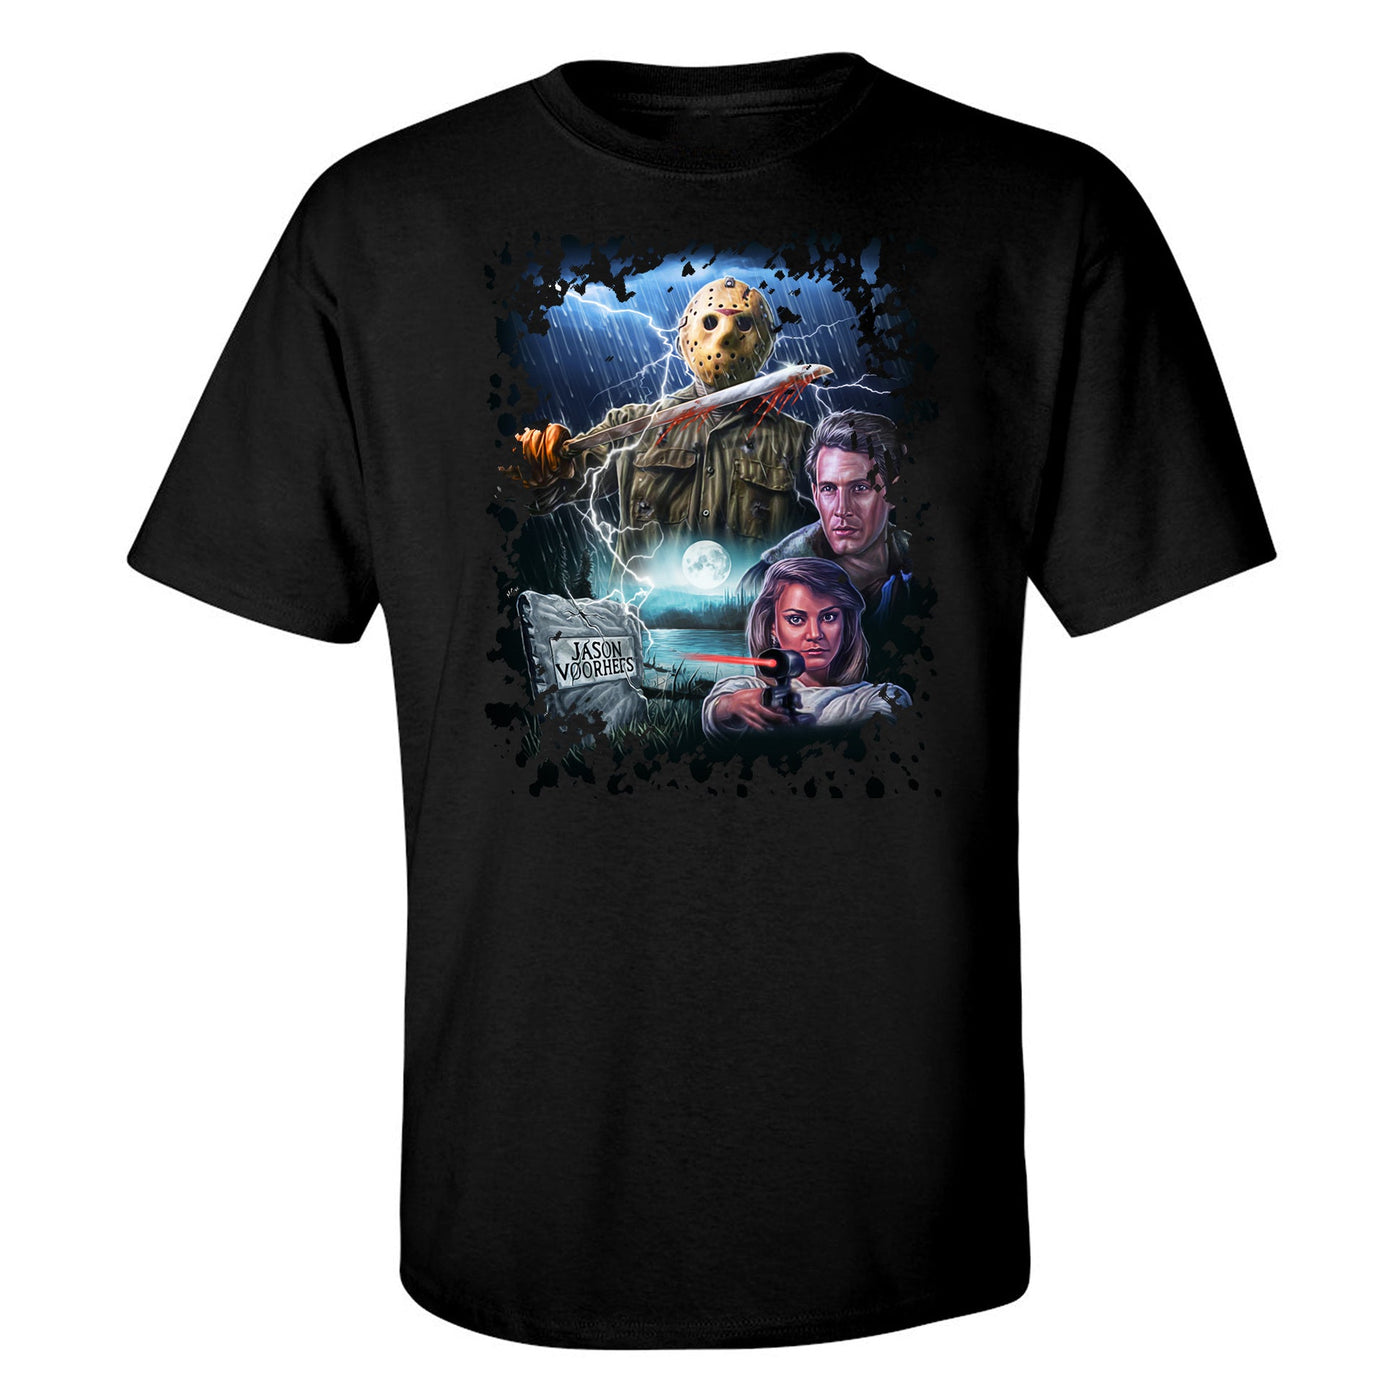 SPECIAL "He Lives" Short Sleeve T-Shirt